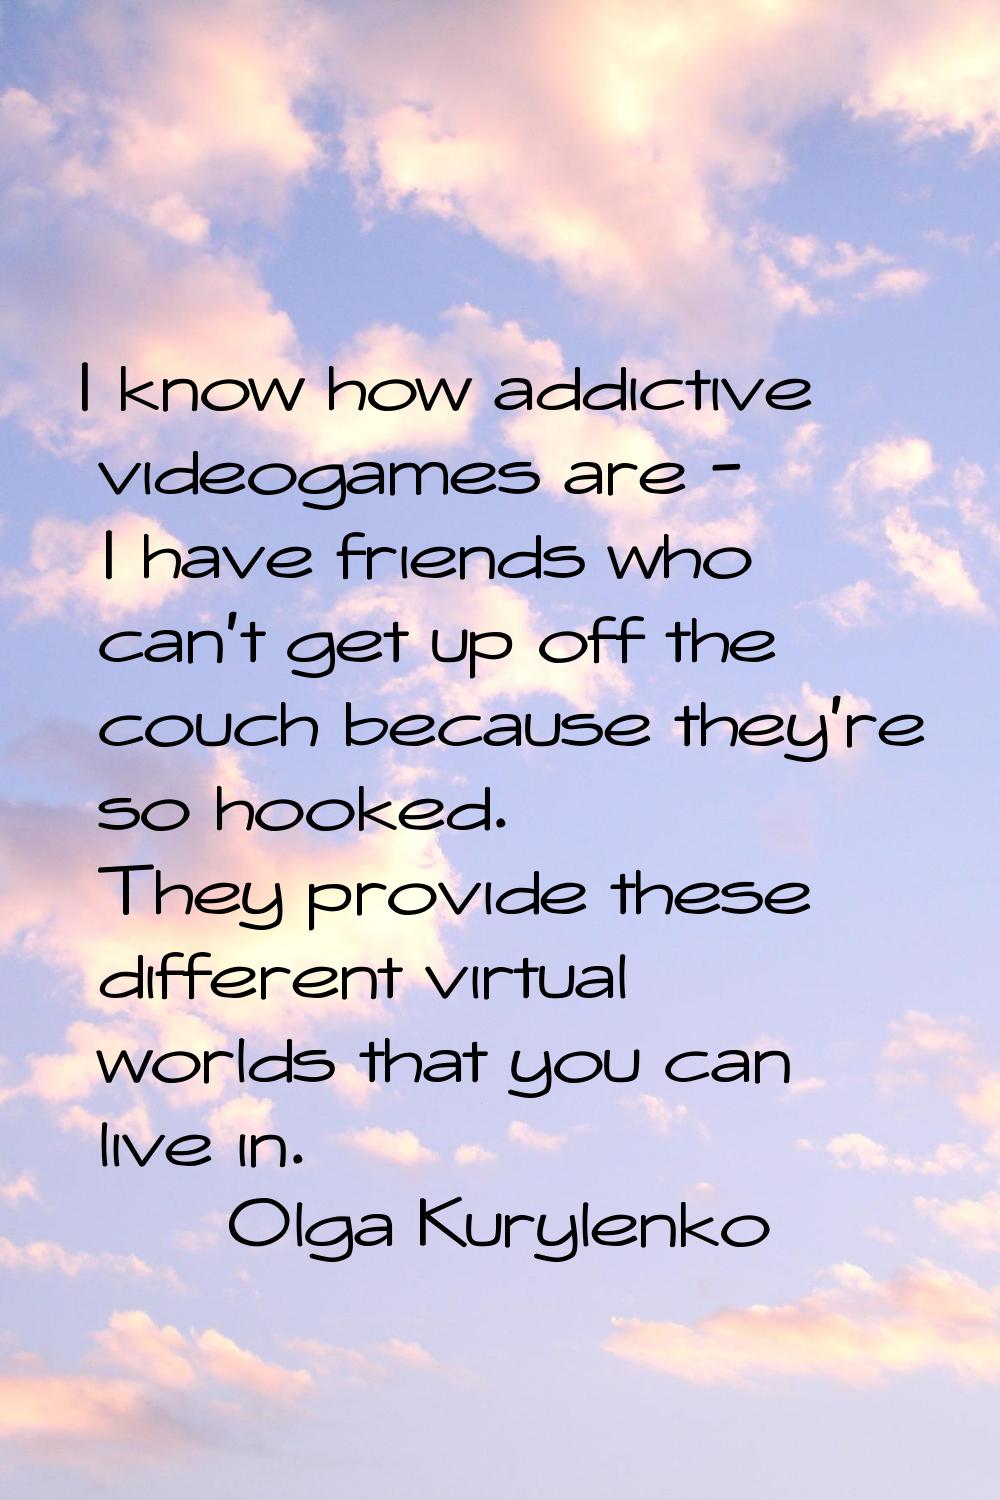 I know how addictive videogames are - I have friends who can't get up off the couch because they're